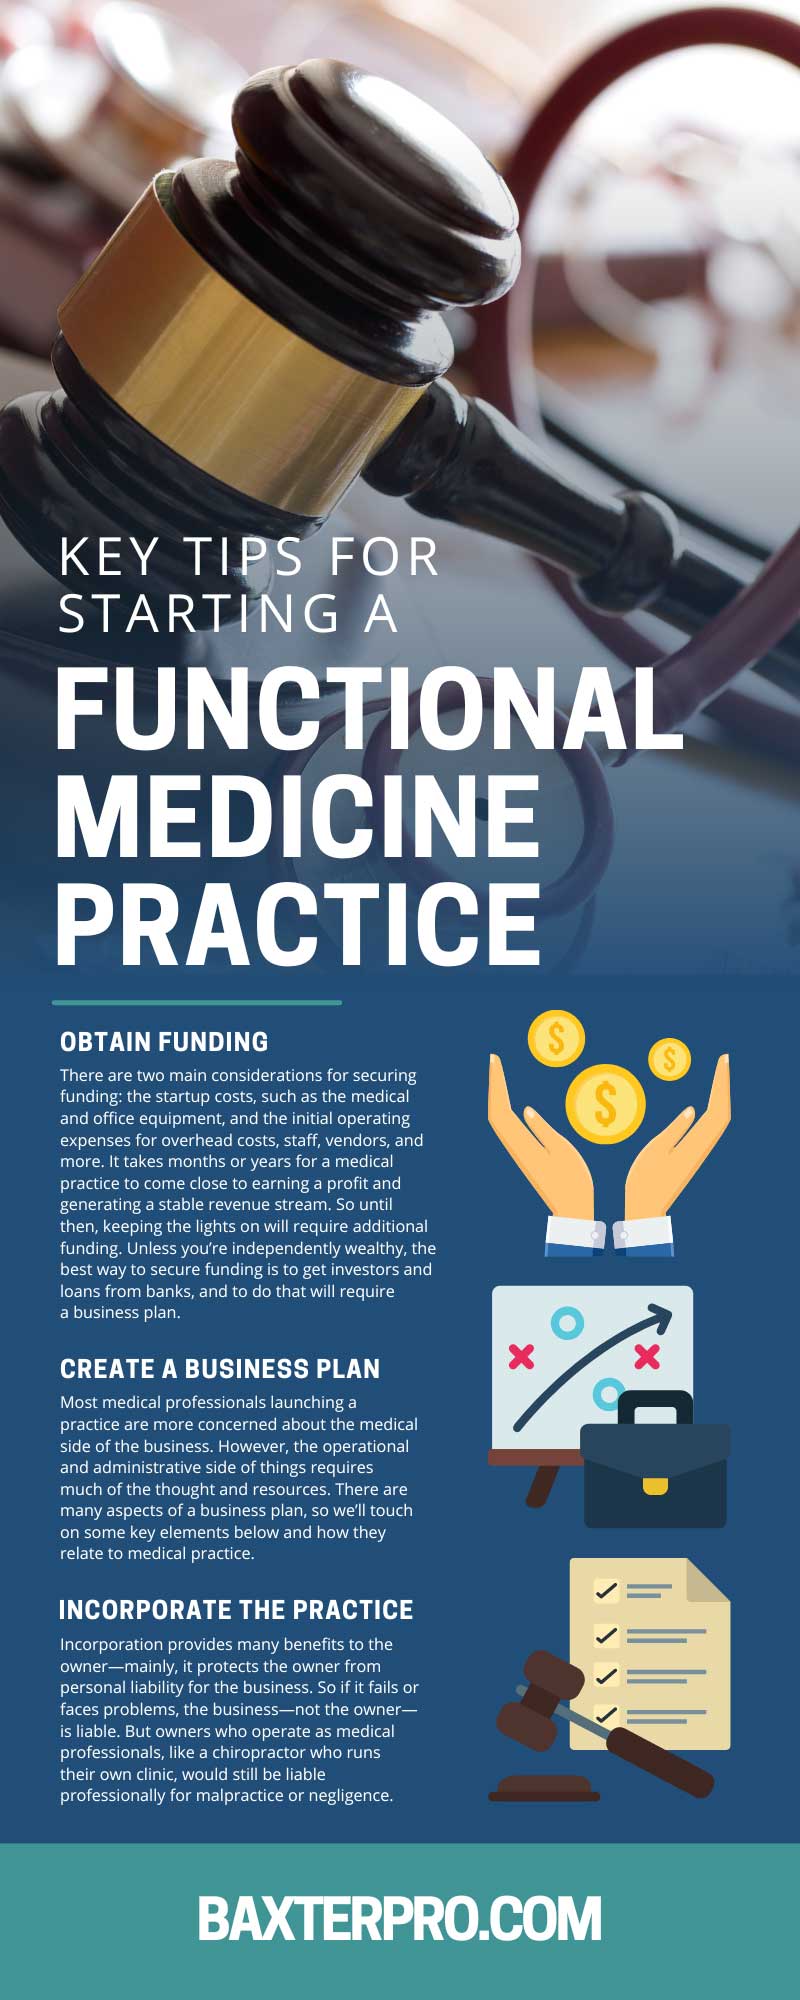 5 Key Tips for Starting a Functional Medicine Practice